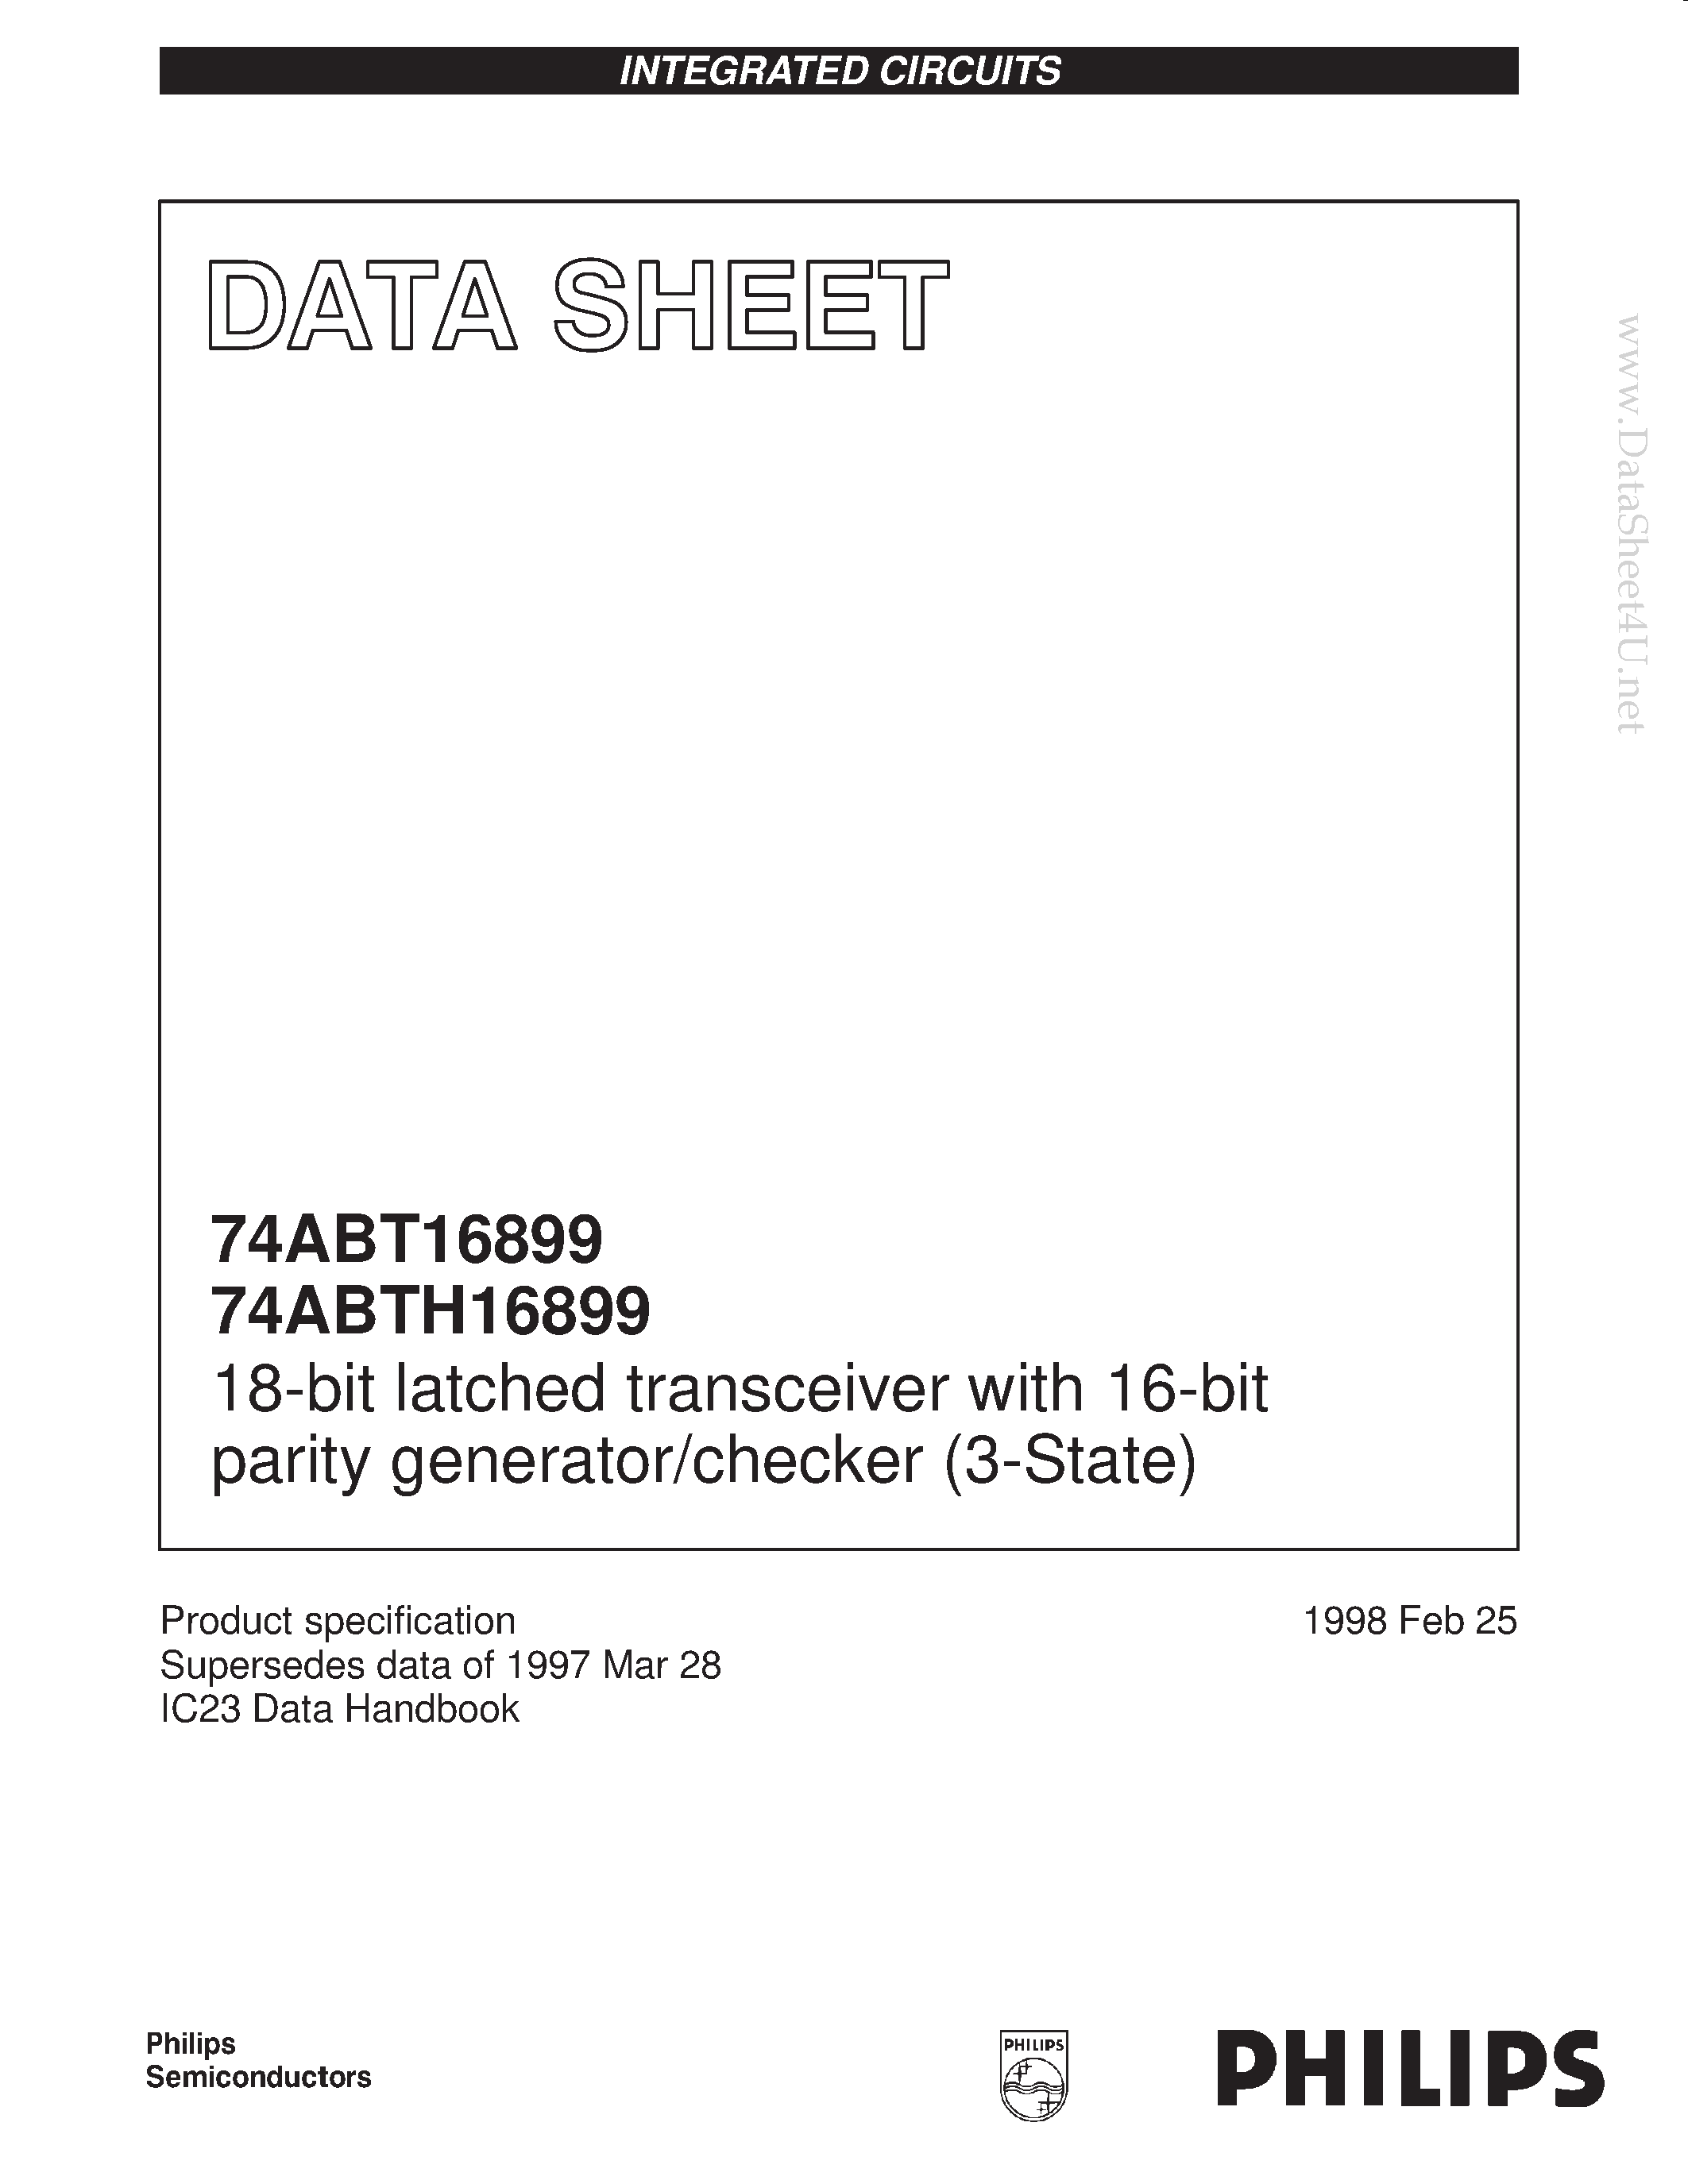 Даташит 74ABTH16899DGG - 18-bit latched transceiver with 16-bit parity generator/checker 3-State страница 1